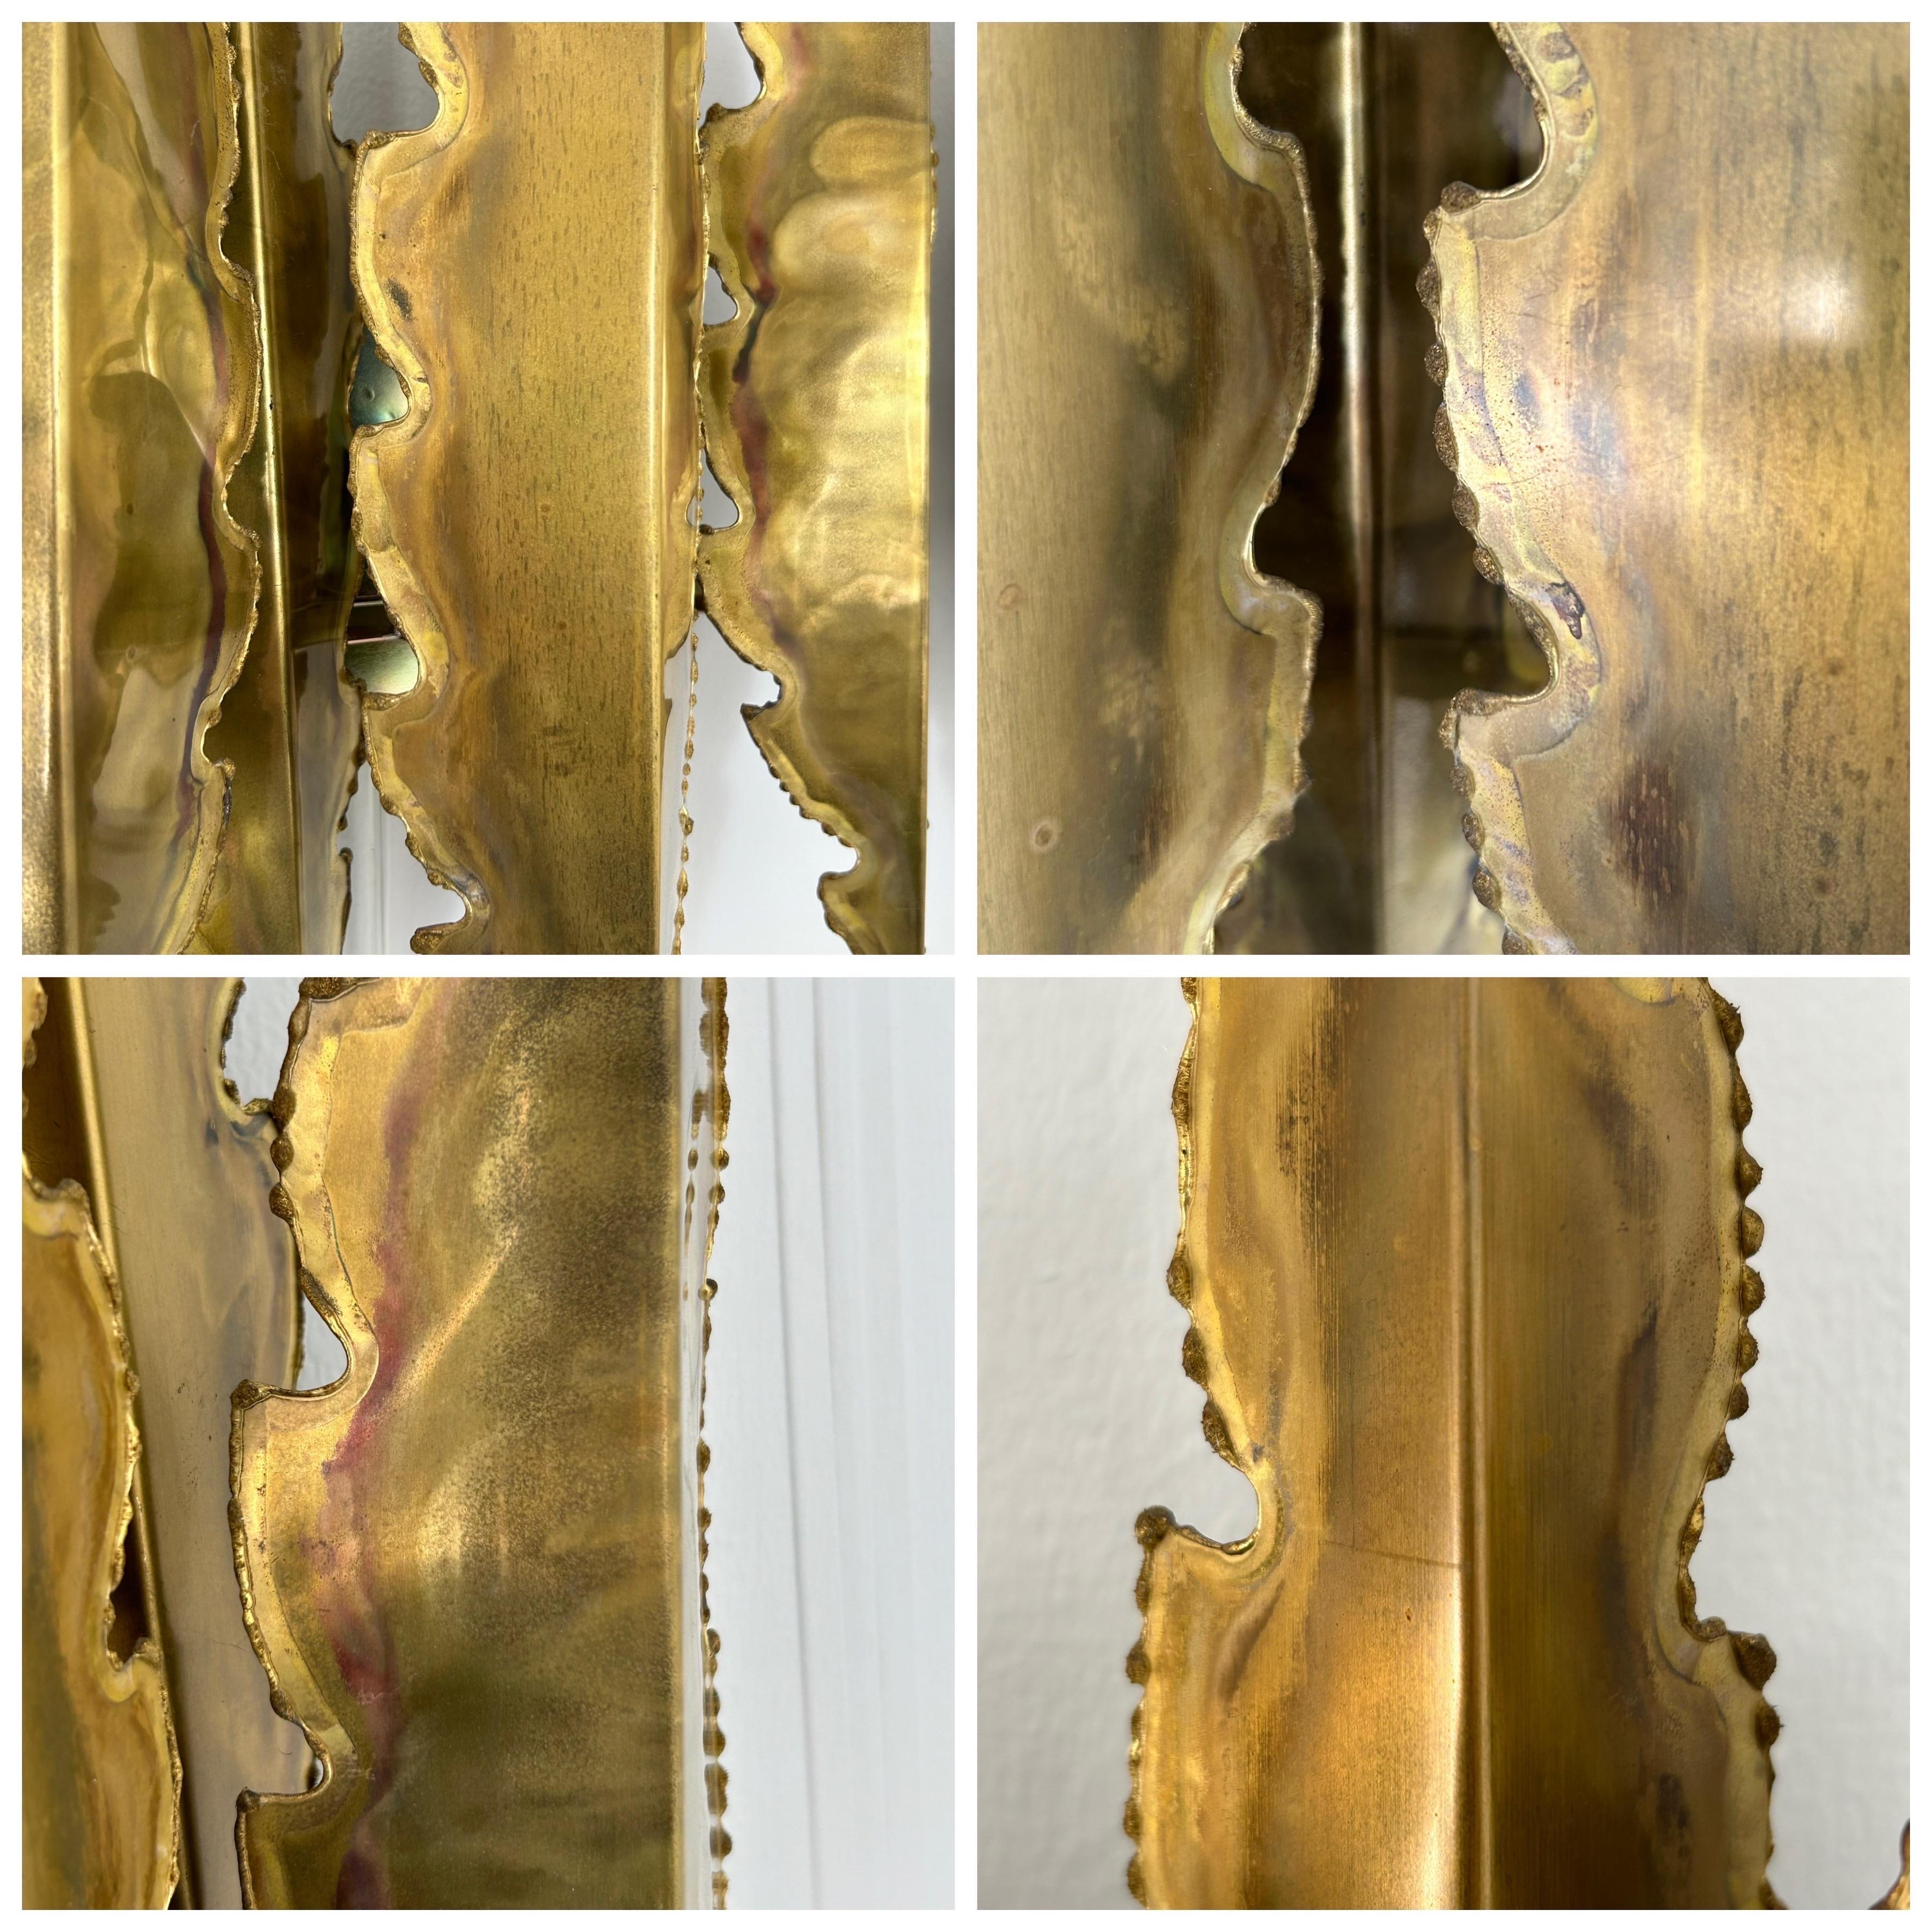 Pair of Large Brass Wall Lamps by Svend Aage Holm Sorensen, 1960s, Denmark For Sale 3